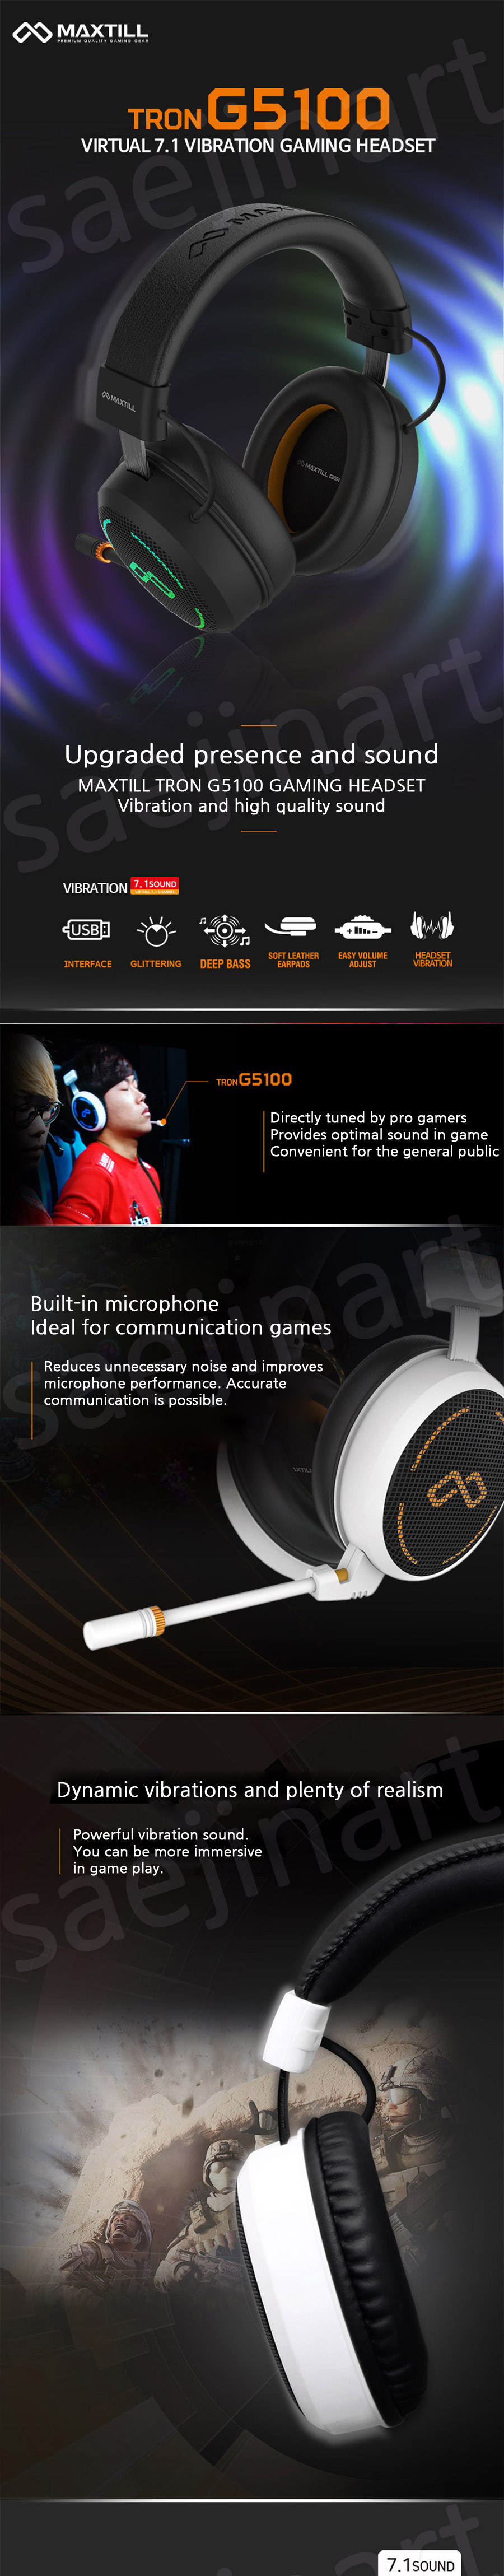 Gaming Headphone Maxtill Tron G5100 Sv Virtual 7 1ch 3d Ccw Cw Surround Vibration Mic Korean Xbox Ps4 Pc Buy Online At Best Prices In Pakistan Daraz Pk